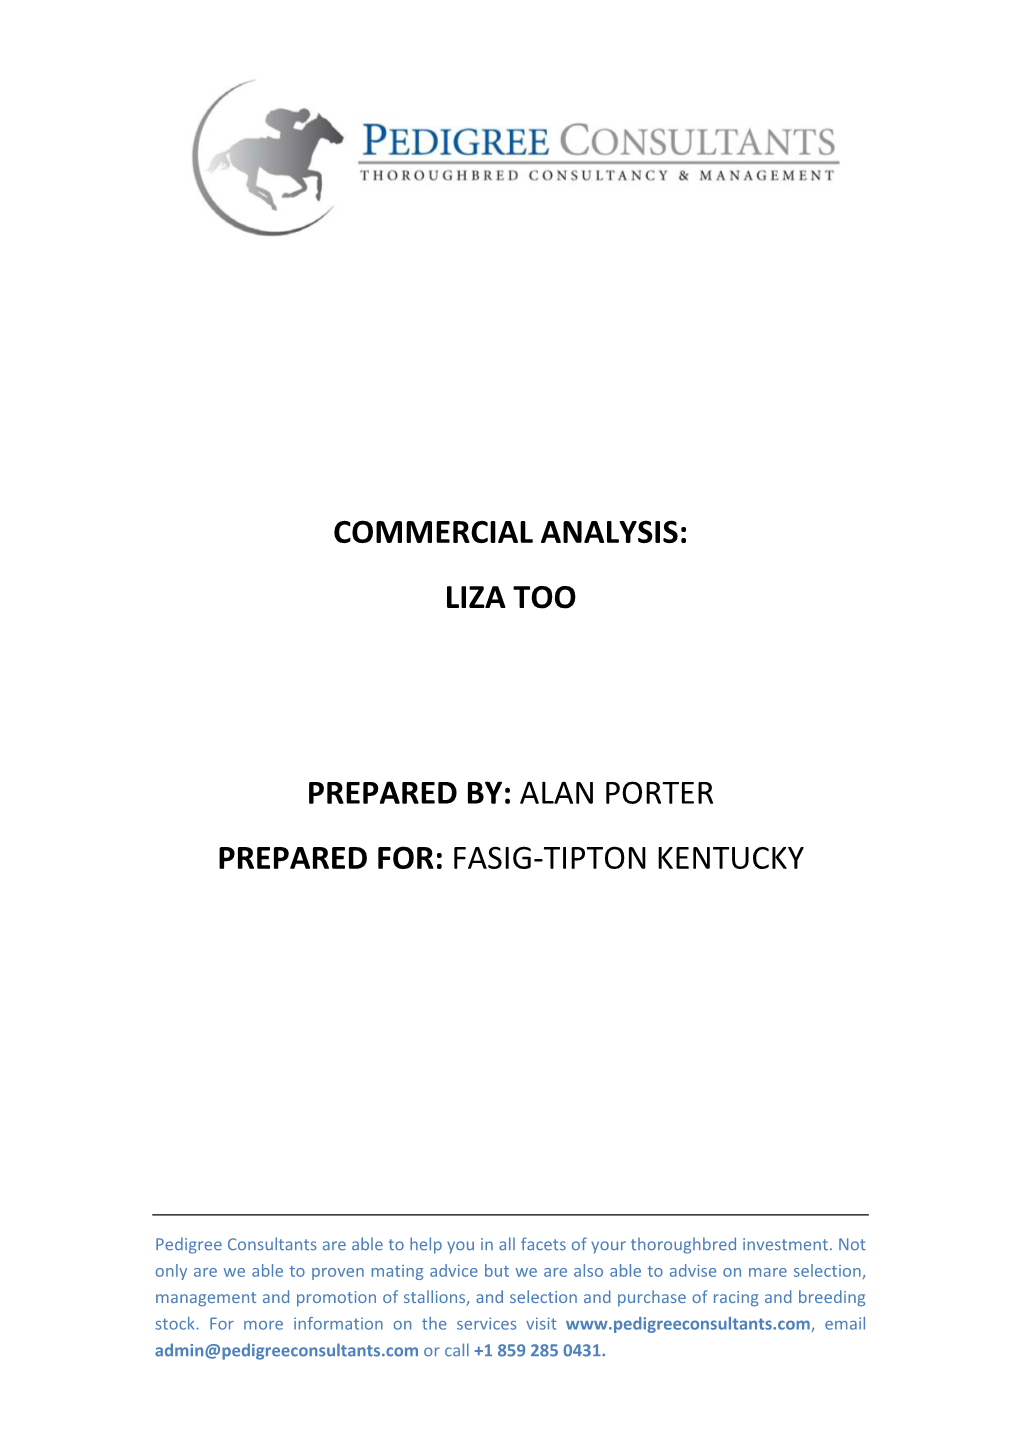 Commercial Analysis: Liza Too Prepared By: Alan Porter Prepared For: Fasig-Tipton Kentucky